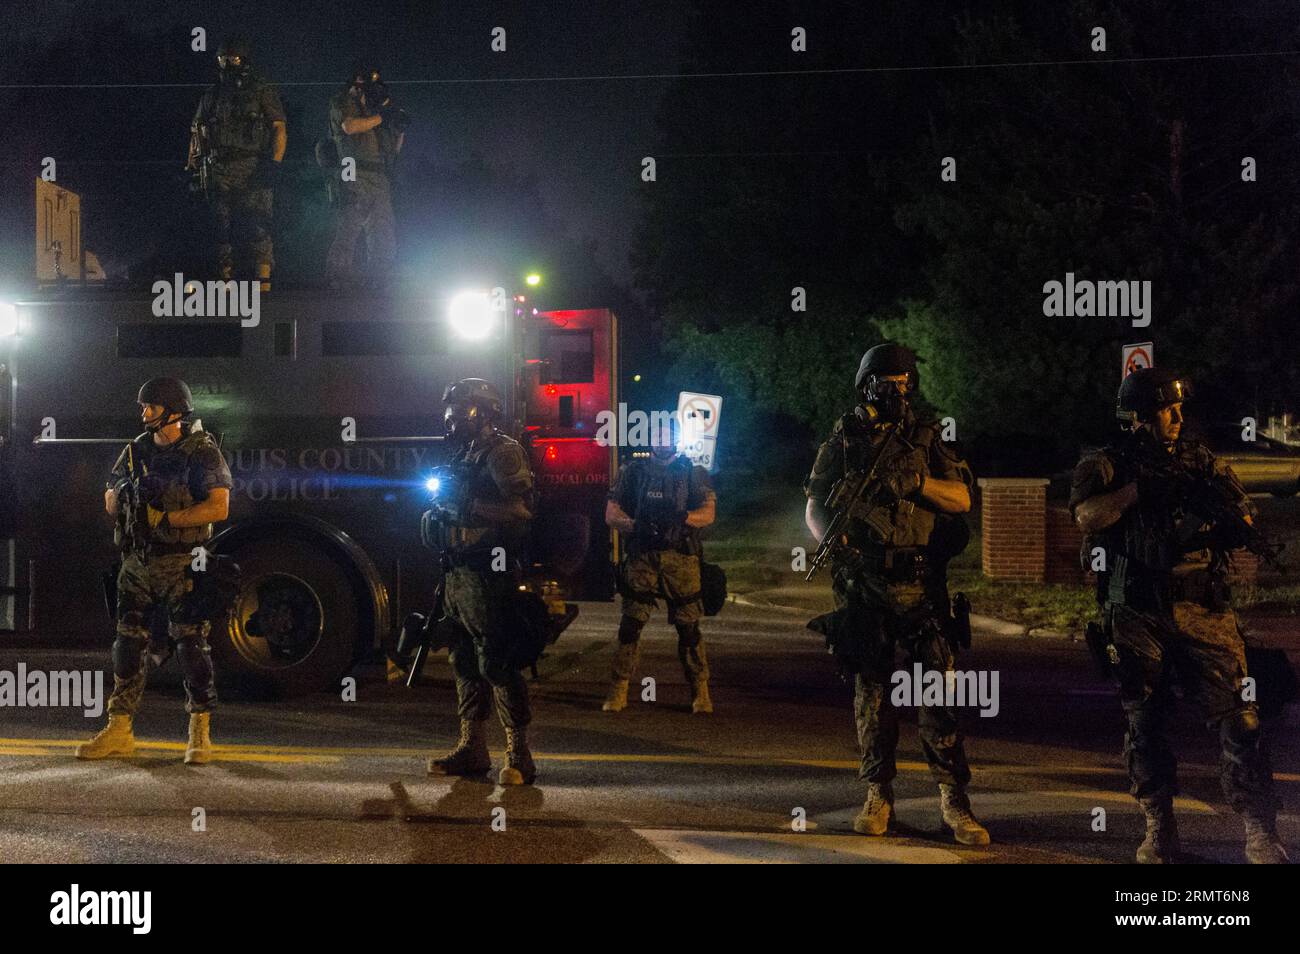 (140819) -- FERGUSON, Aug. 19, 2014 -- Police special units equipped with military gear stand guard during the protests against police killing of Michael Brown in Ferguson, Missouri, the United States, on Aug. 19, 2014. On Aug. 9, 18-year-old African American Michael Brown was shot dead by police in Ferguson, sparking a week-long protest in the town where most of the population is black. )(zhf) US-MISSOURI-FERGUSON-PROTEST ShenxTing PUBLICATIONxNOTxINxCHN   Ferguson Aug 19 2014 Police Special Units Equipped With Military Gear stand Guard during The Protest against Police Killing of Michael Bro Stock Photo